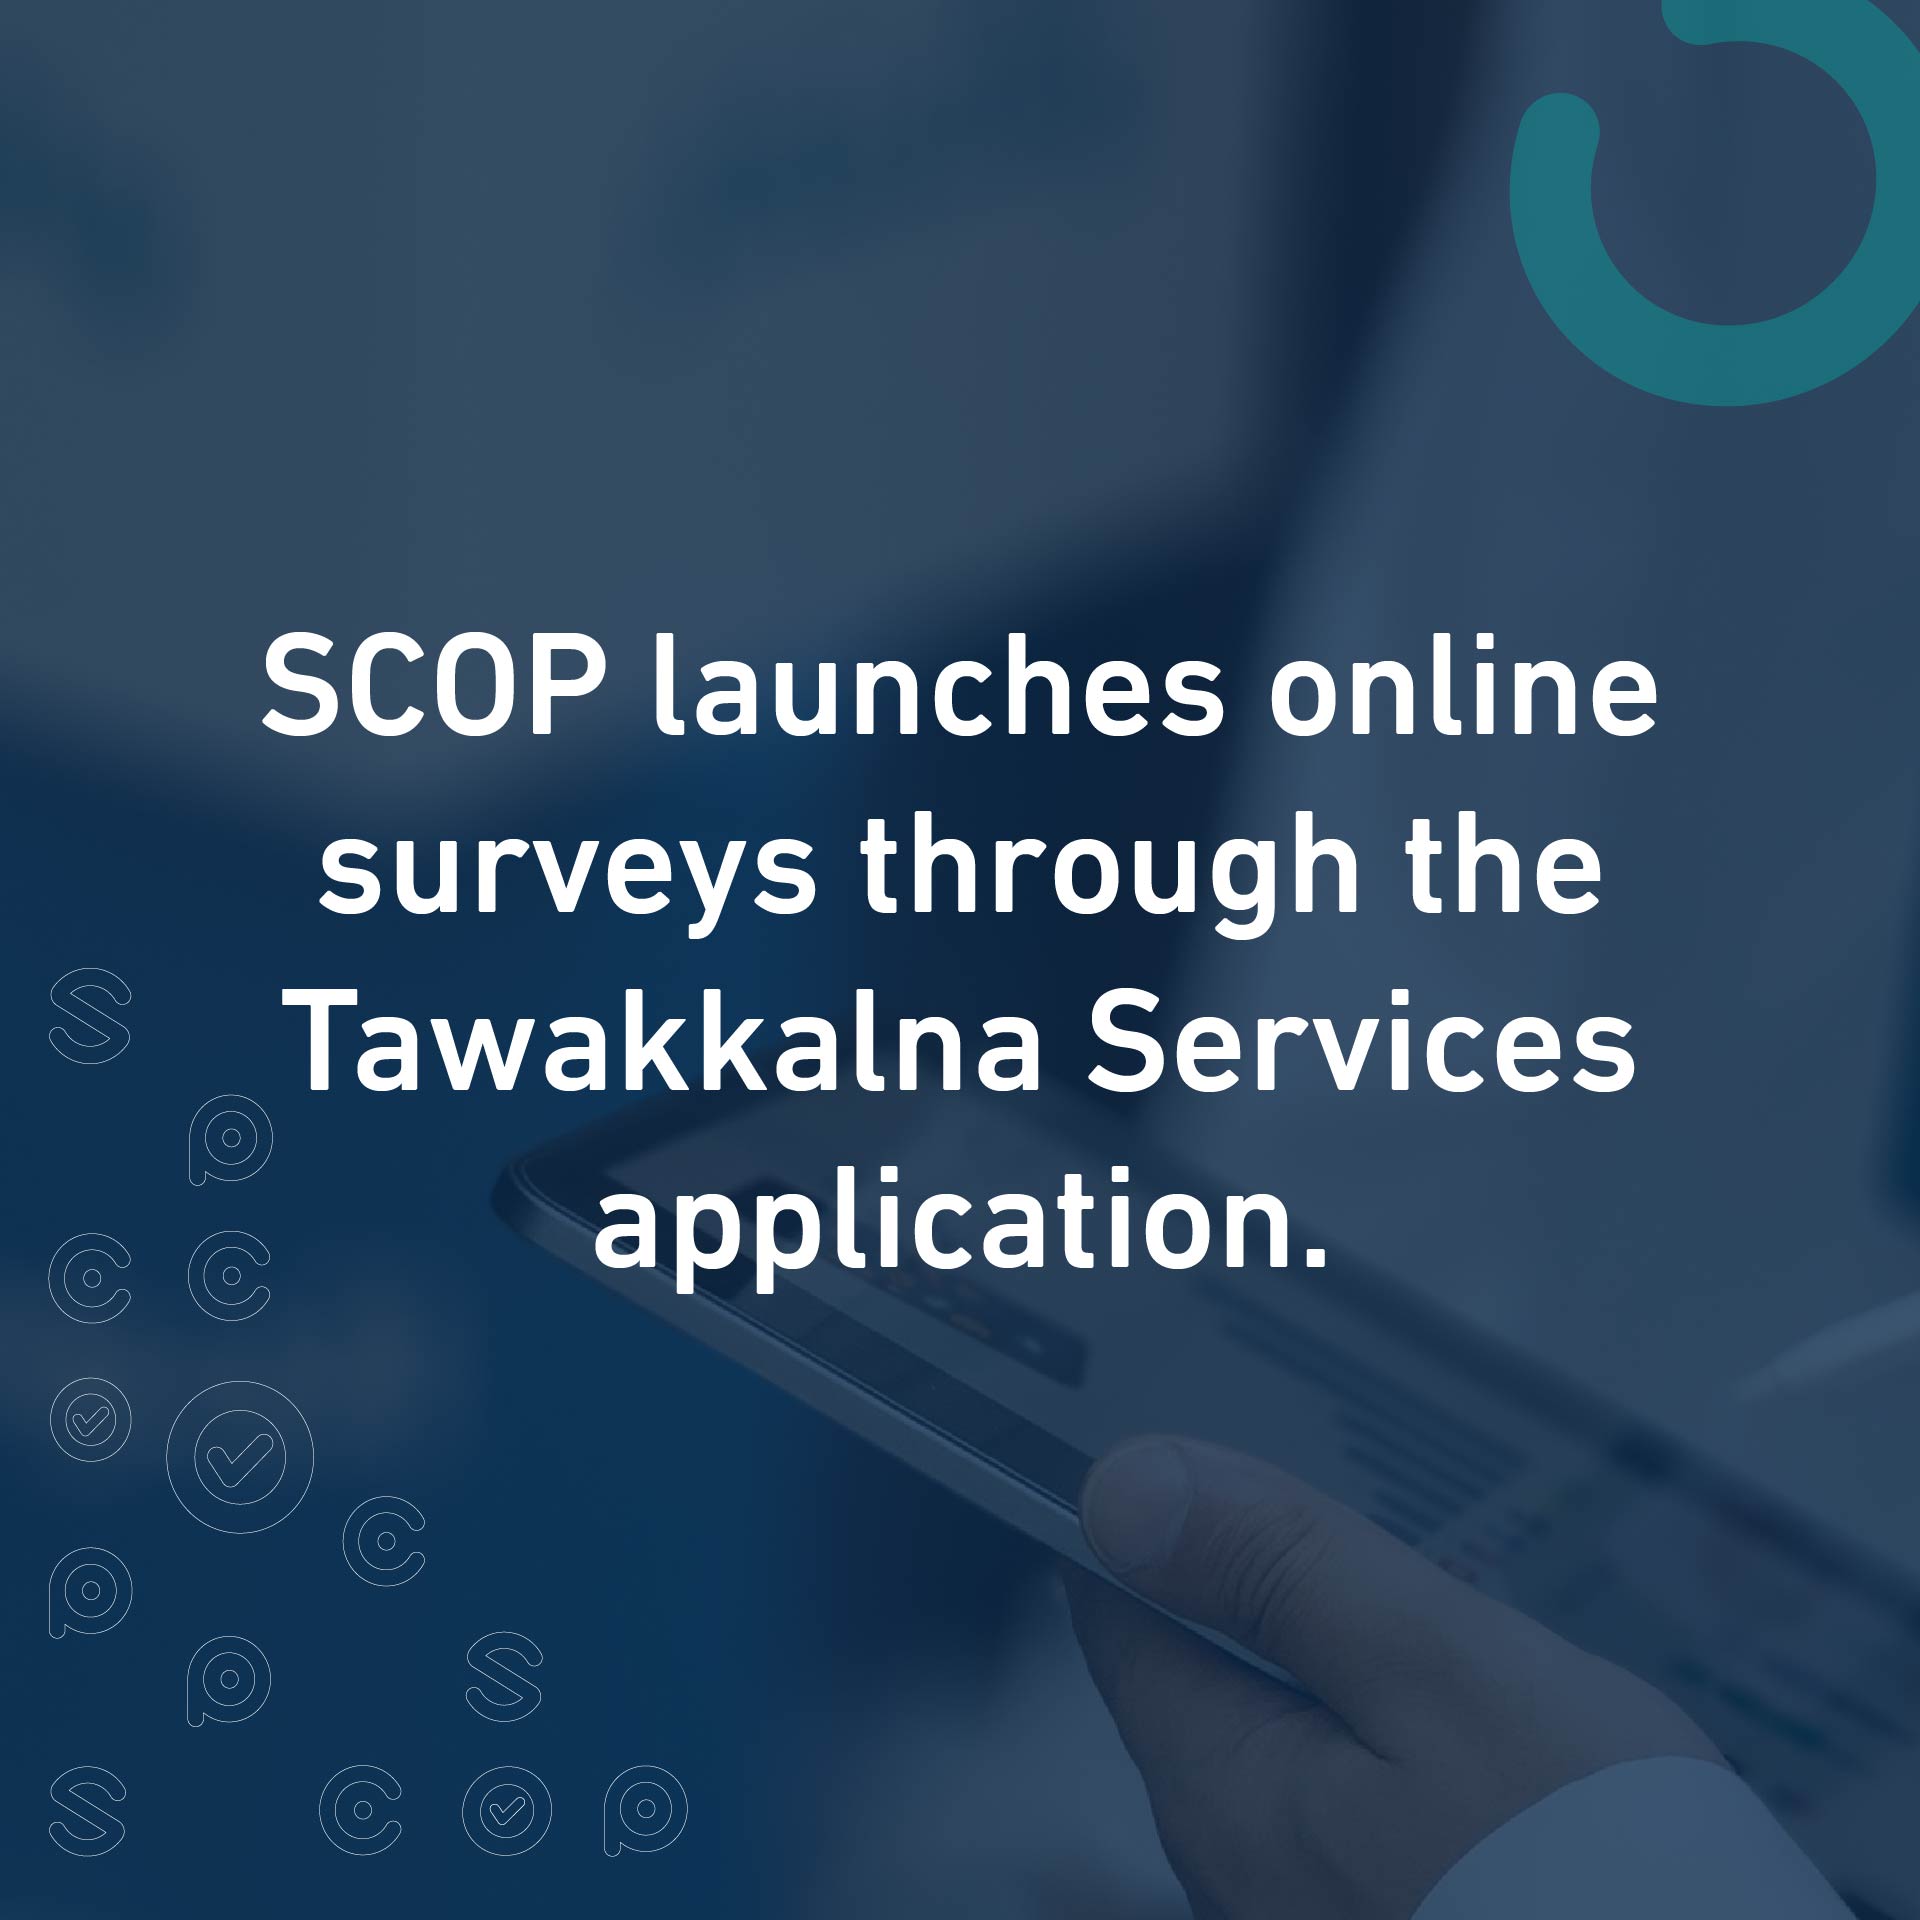 A strategic partnership between the Saudi Authority for Data and Artificial Intelligence (SDAIA) and the Saudi Center for Opinion Polling (SCOP) in the implementation of online surveys.